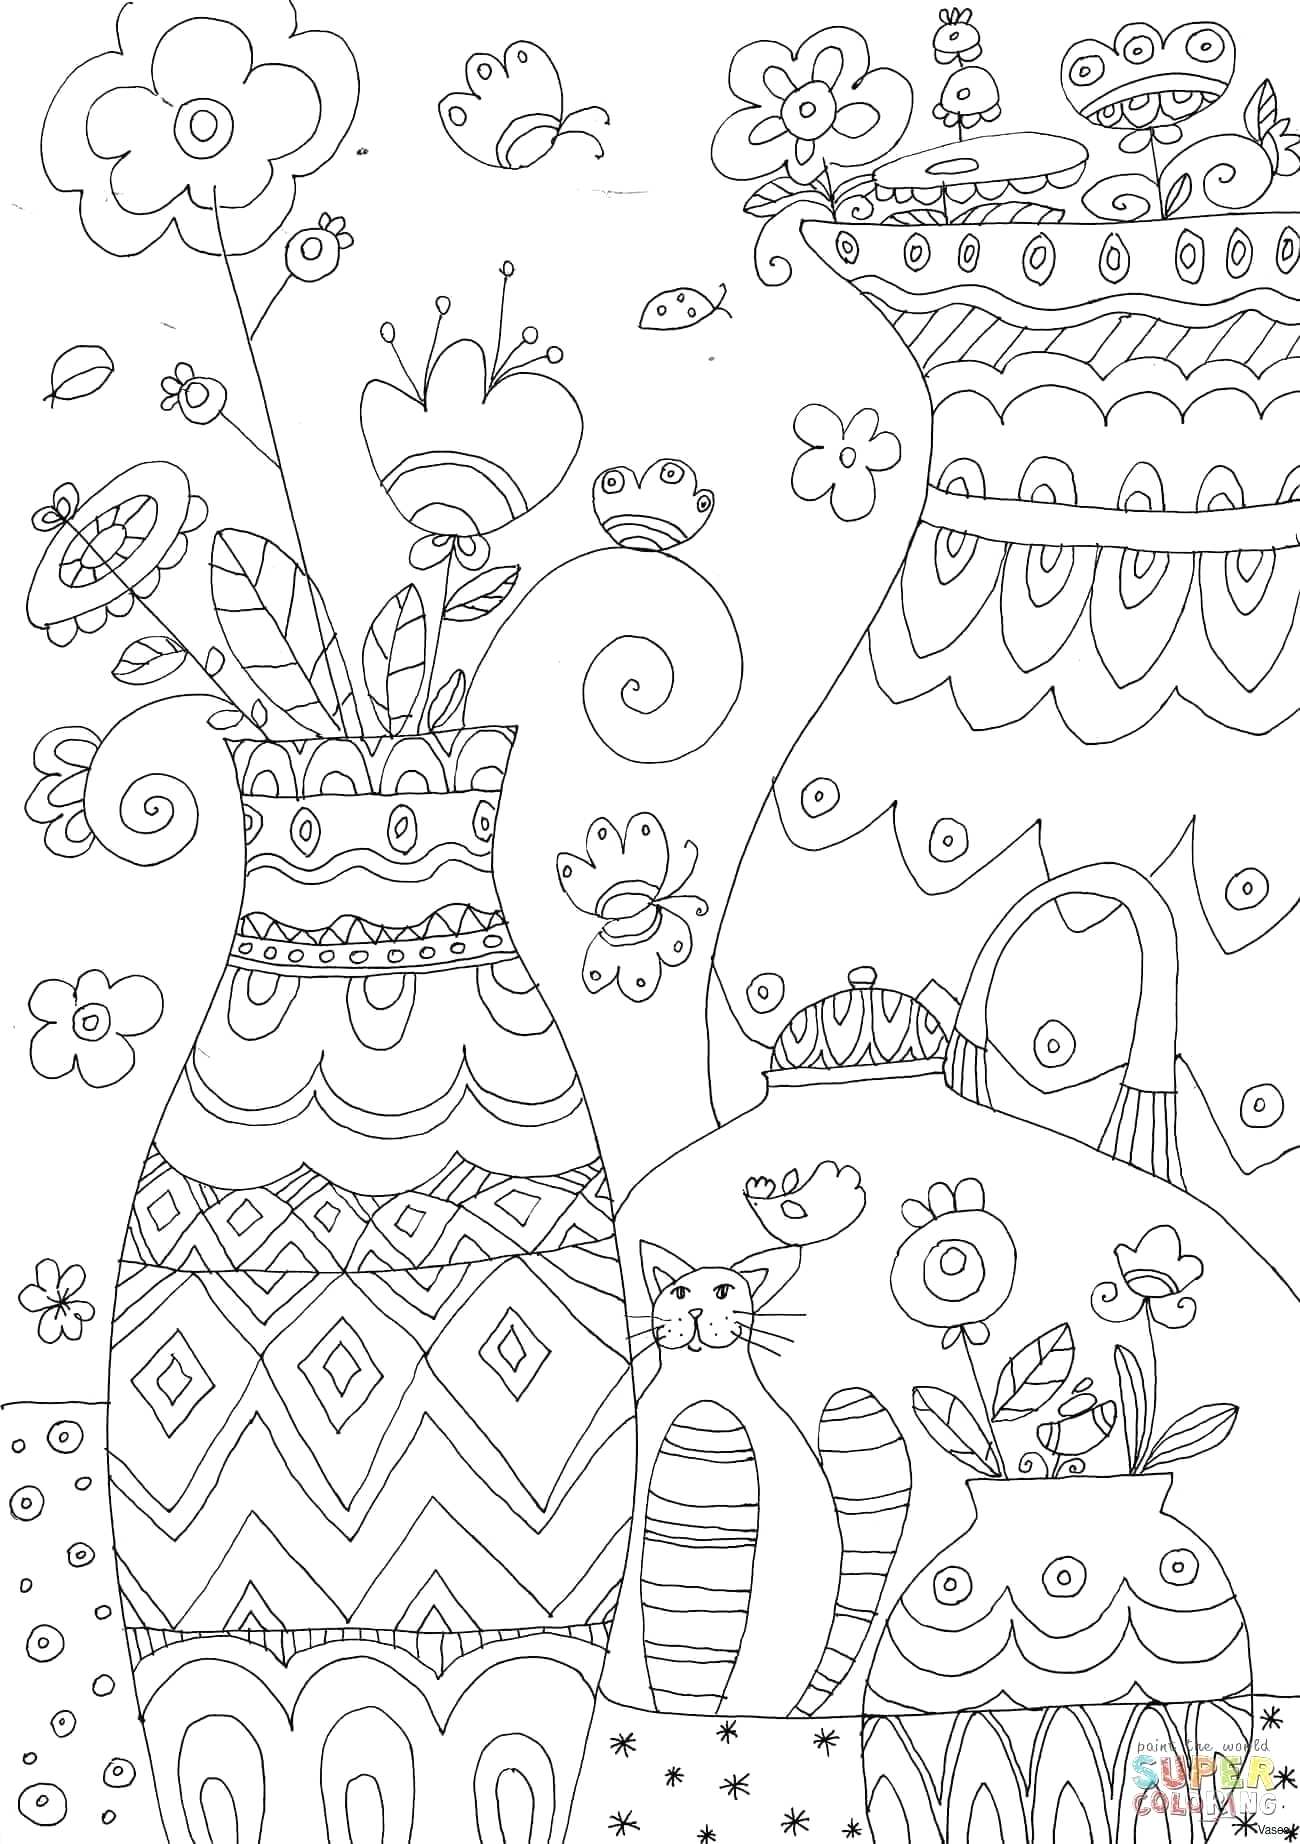 Coloring Pages : Best Coloring To Print Inspirational ...